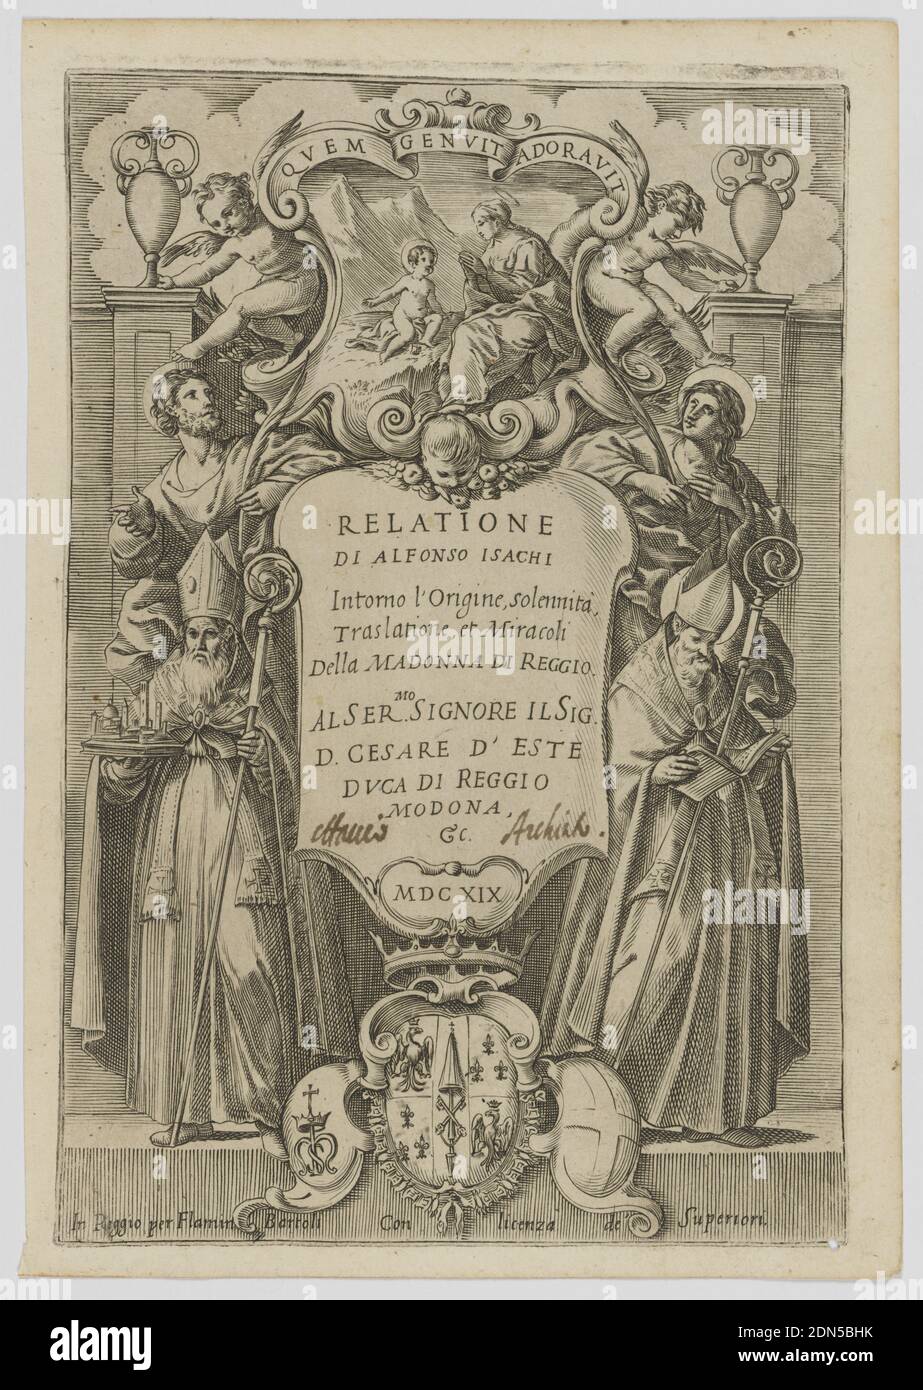 Frontispiece: Relatione di Alfonso Isachi intorno l'origine, solennita`, traslatione, et miracoli della Madonna di Reggio (Alfonso Isachi's account of the origin, solemnity, translatione[?], and miracles of the Madonna of Reggio), Giovanni Luigi Valesio, Italian, ca. 1583 - 1633, Engraving on paper, Title page with inscription on central tablet, flanked by vase-topped columns and figures. Two ecclesiastical robed elders with scepters at right and left, and above them two haloed men, who each look up at a cherub. A scene of Mary and Christ as a child above the tablet, under a Latin phrase Stock Photo